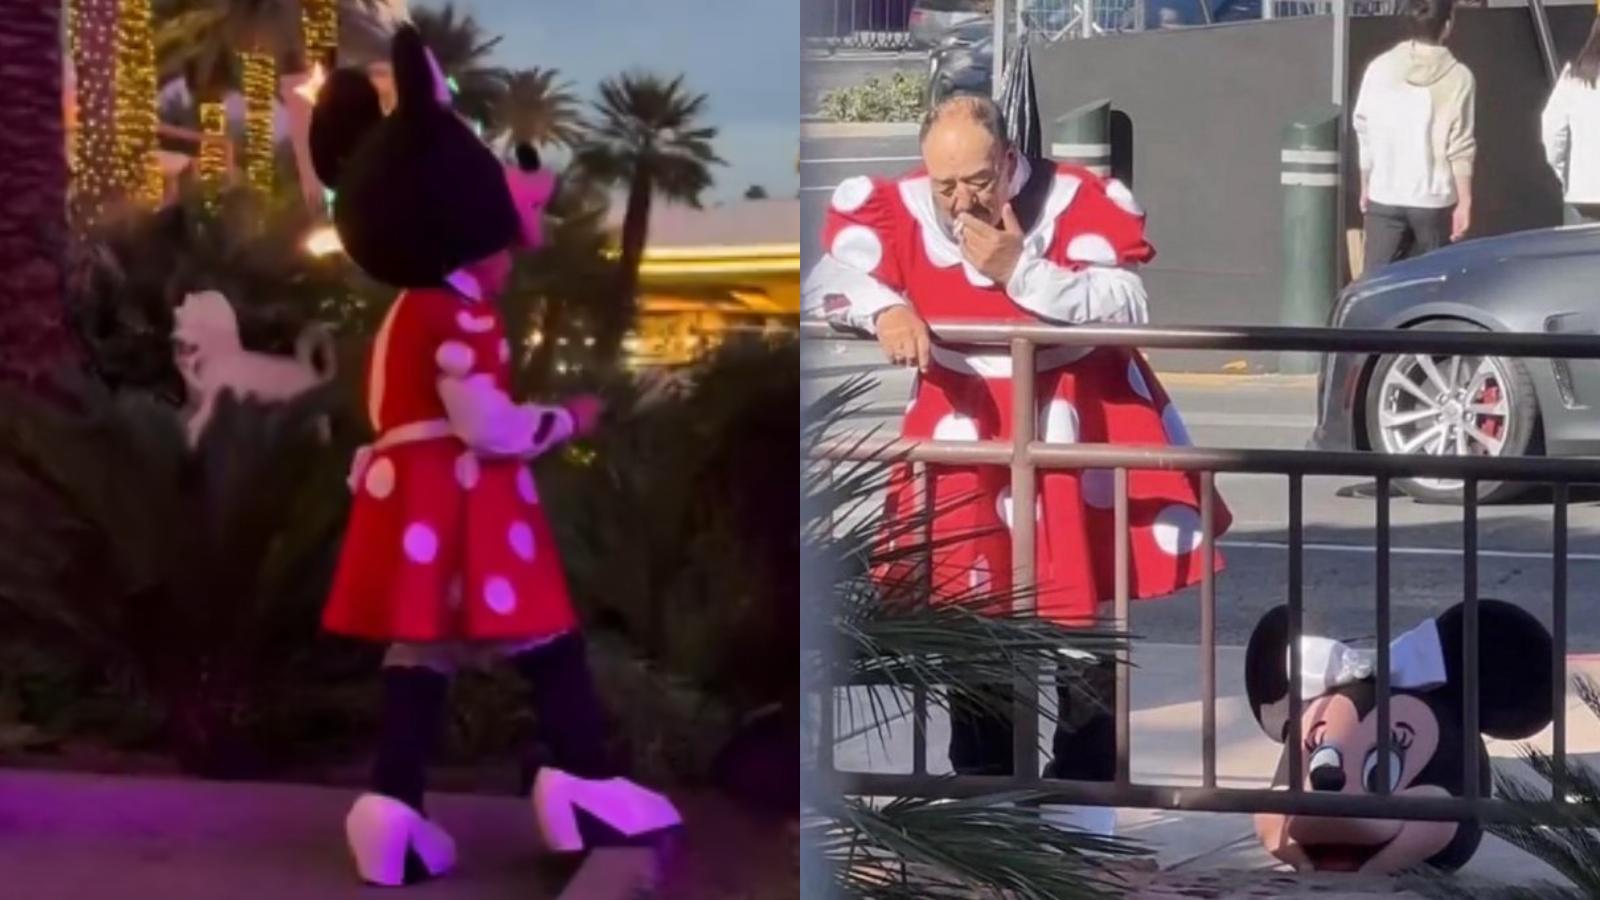 Video of Minnie Mouse smoking surfaces after Disney mascot photo goes ...